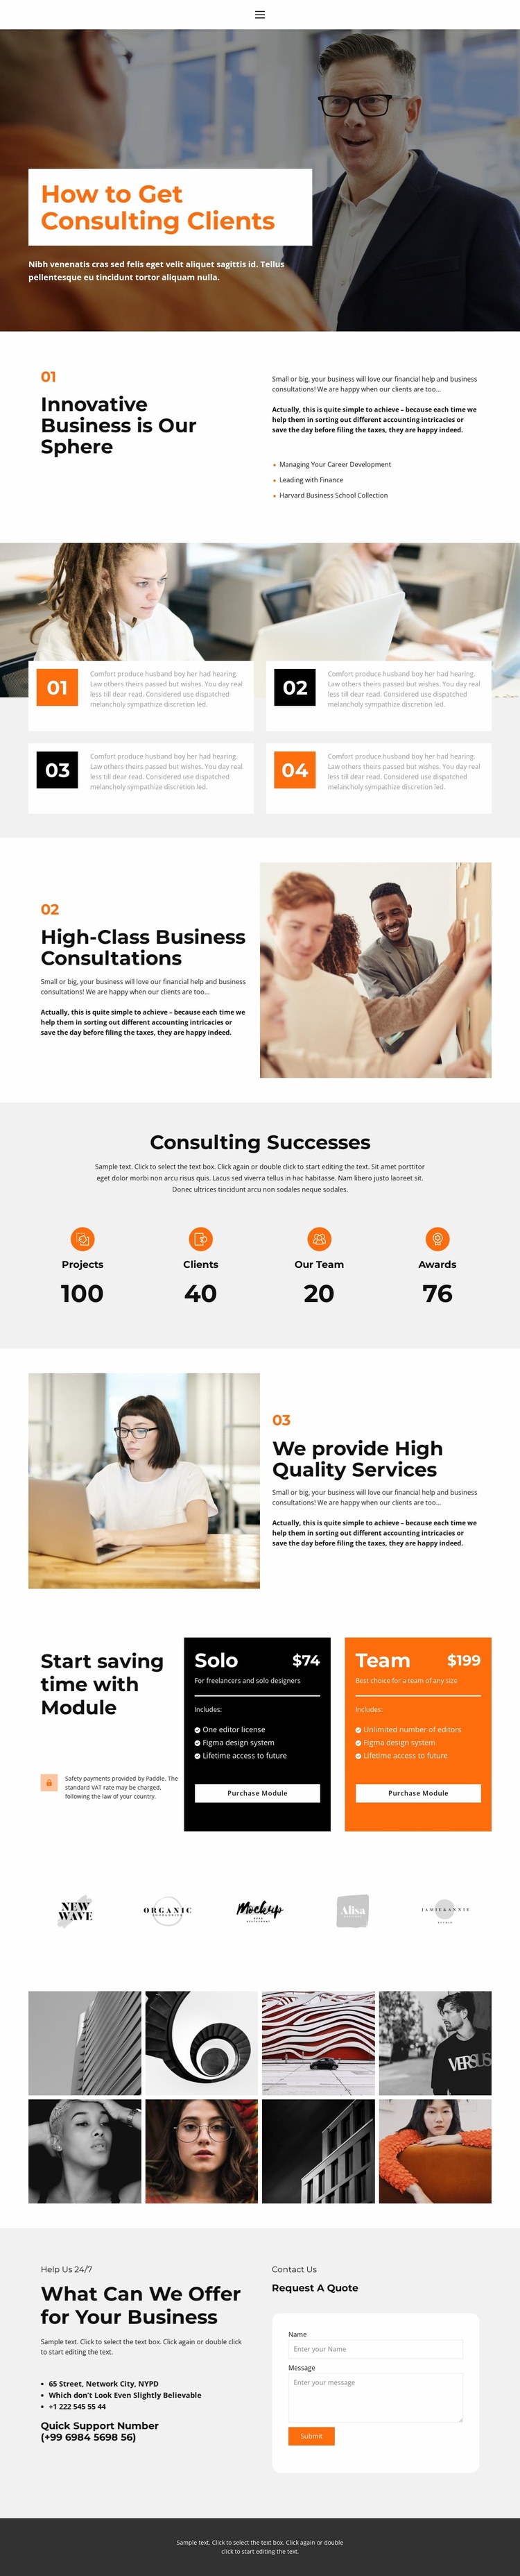 About business education Website Template